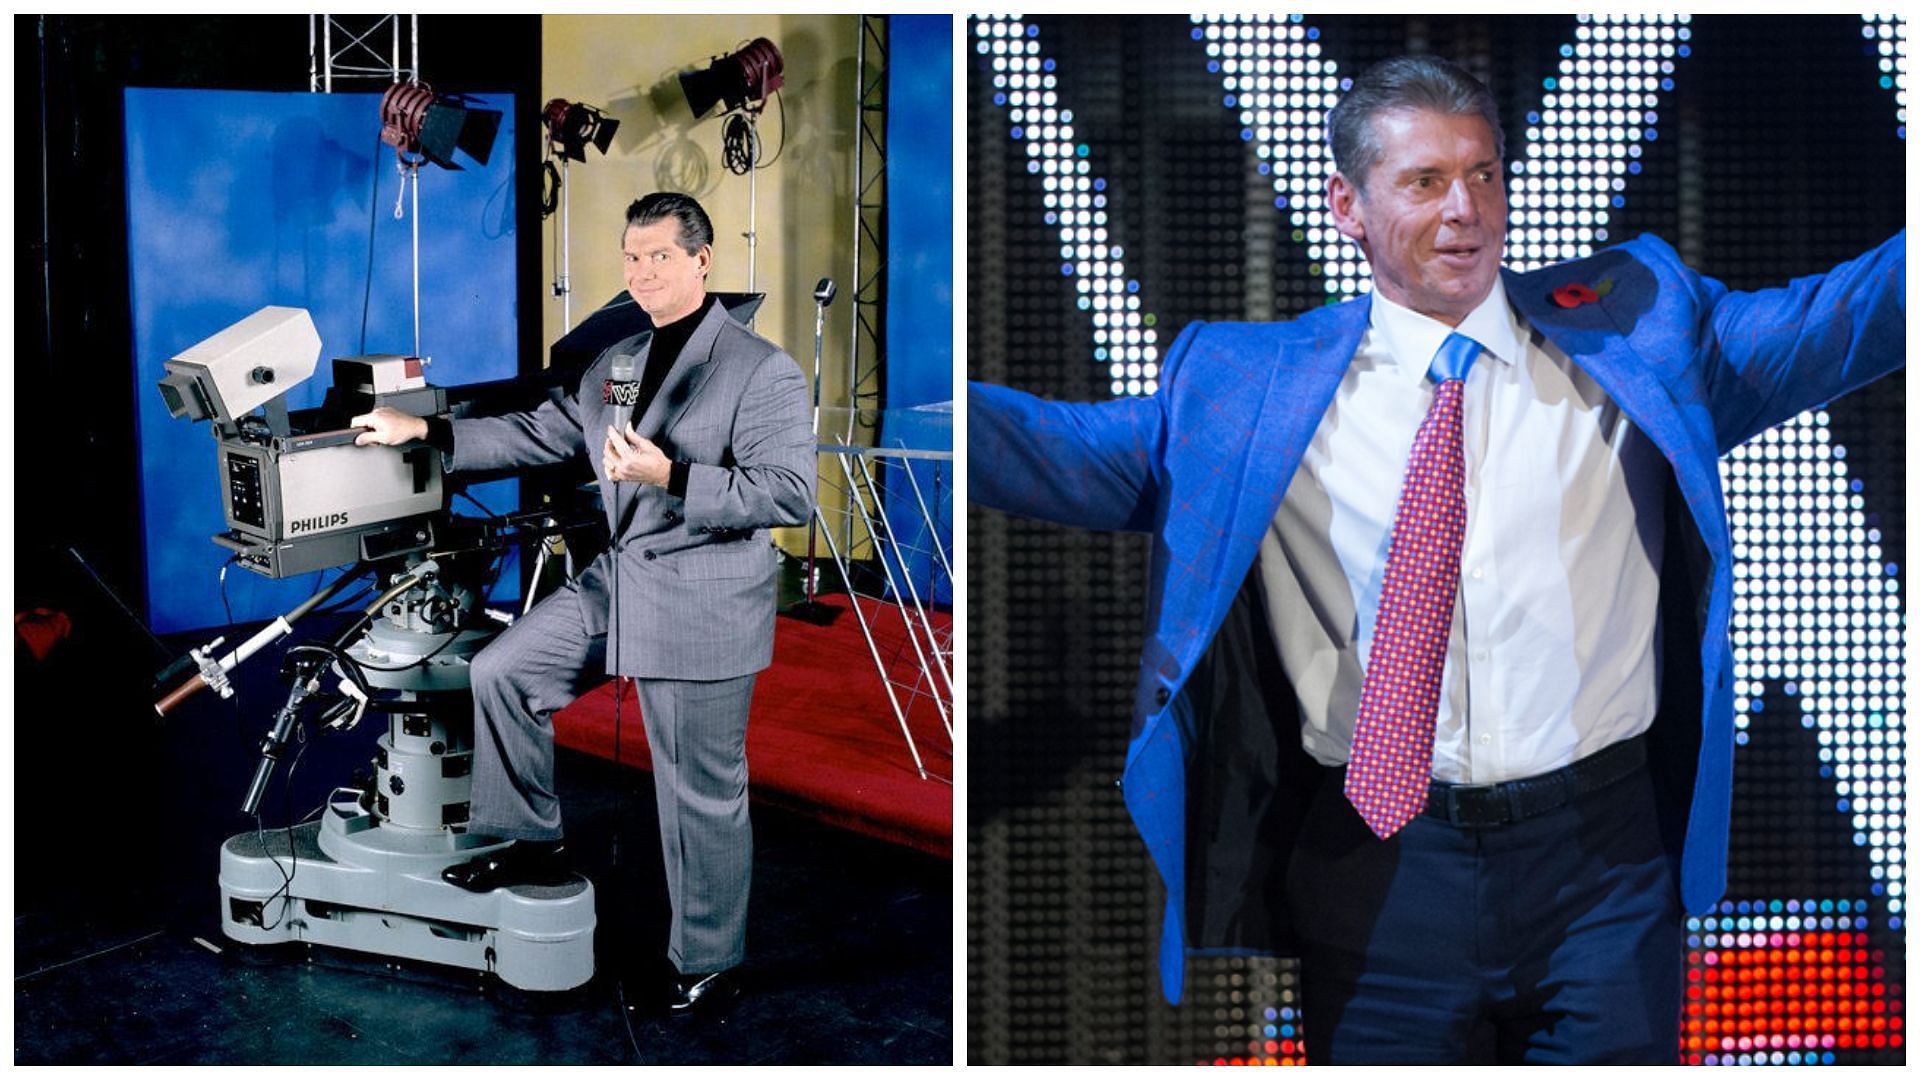 Vince McMahon is the Executive Chairman of WWE.